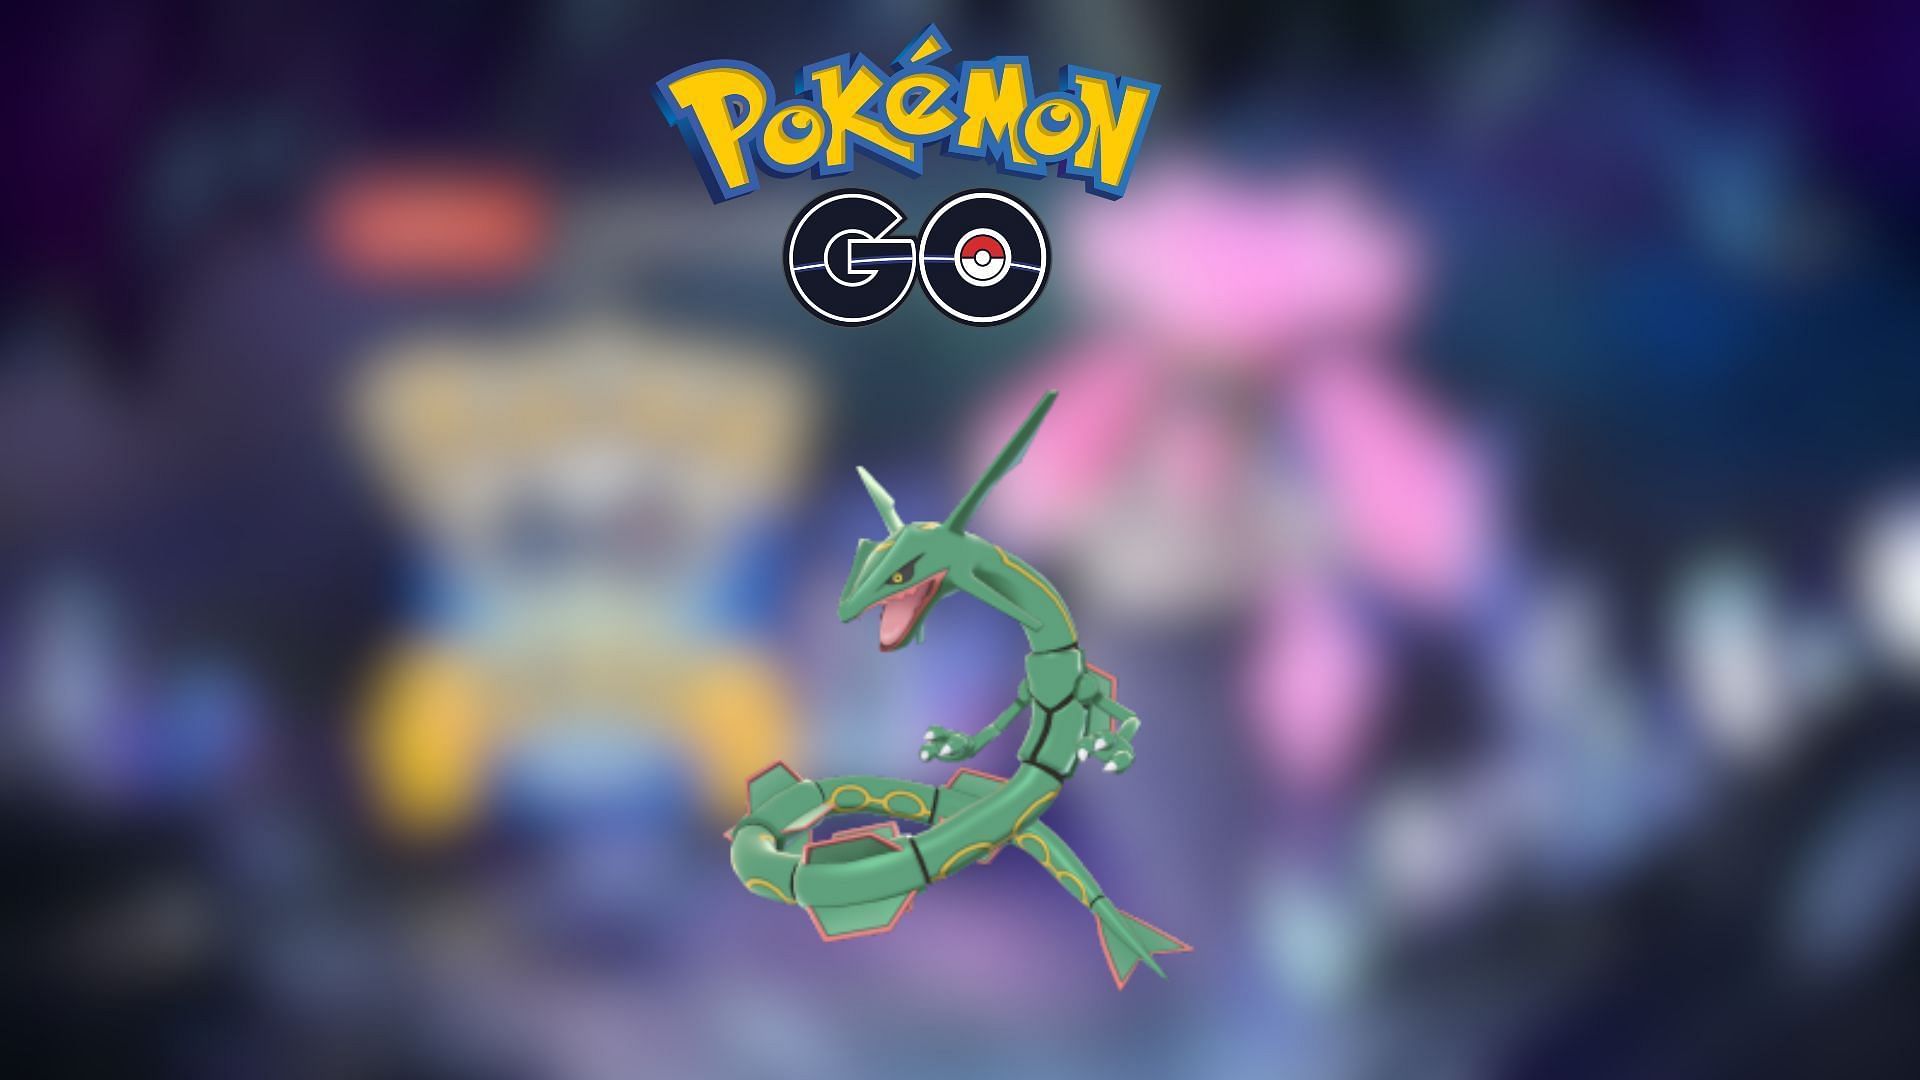 Rayquaza as it appears in the game (Image via Niantic/Serebii)